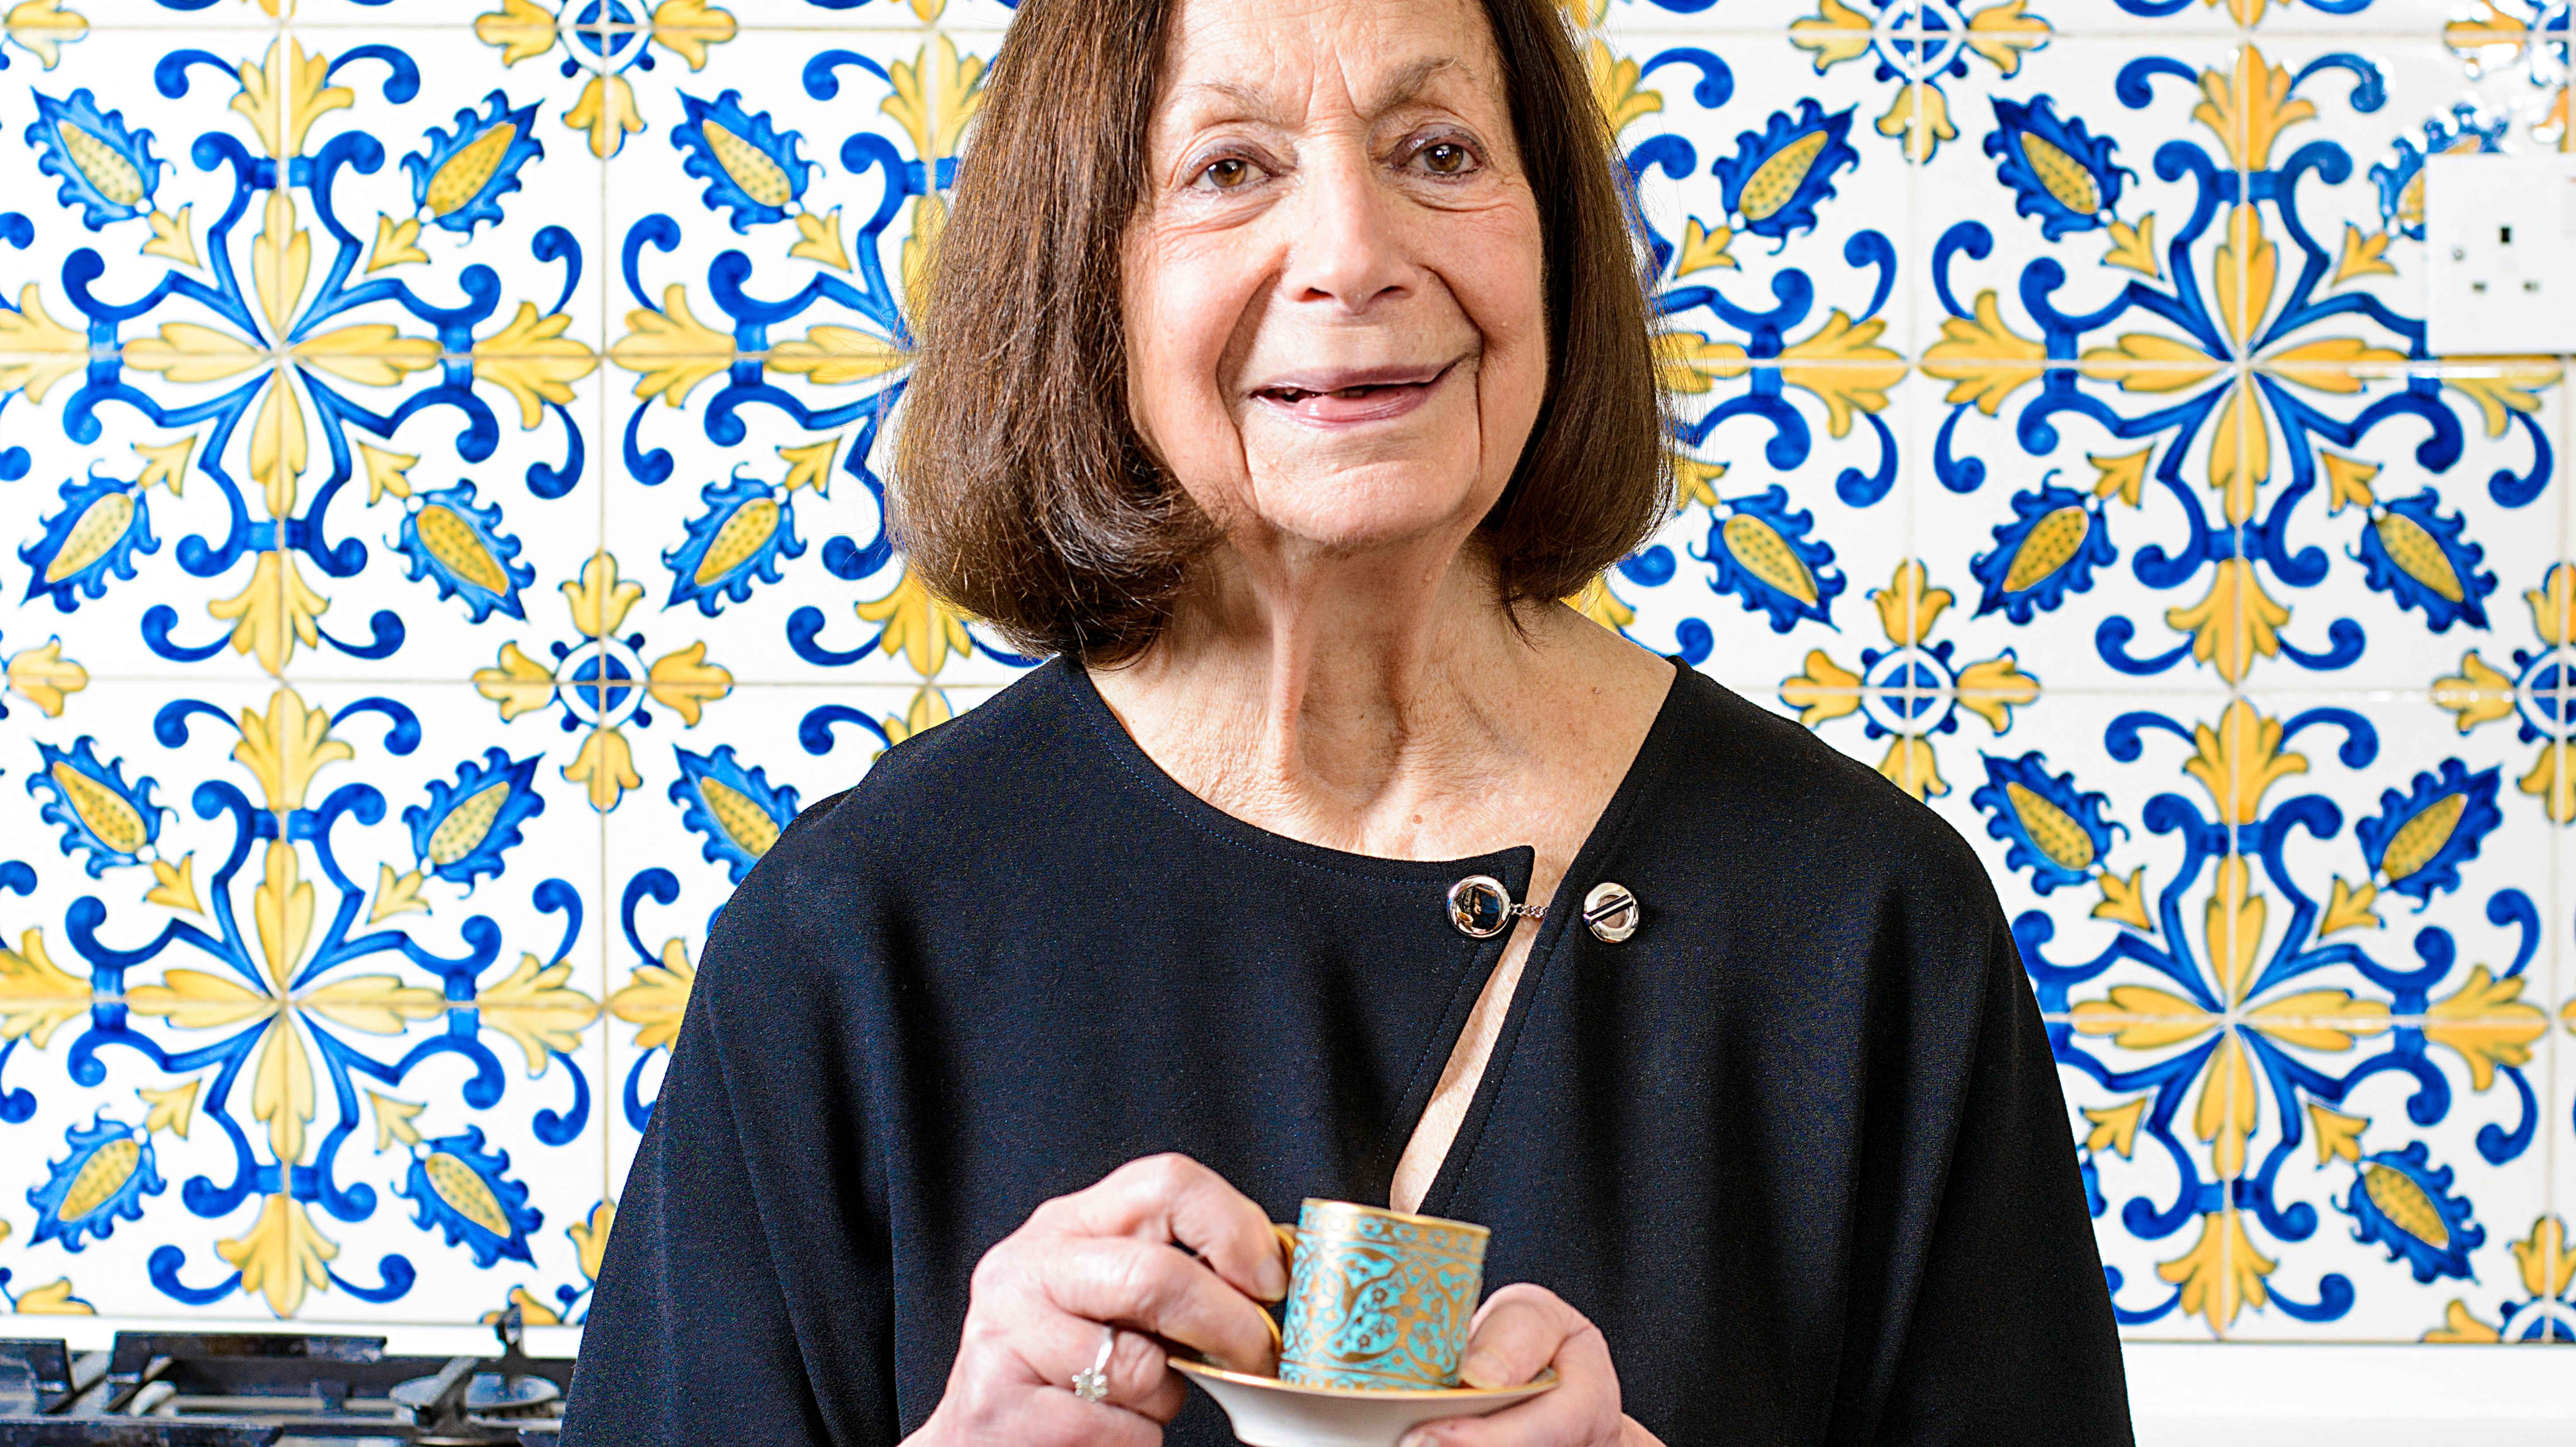 Claudia Roden with blue and yellow tiles behind her